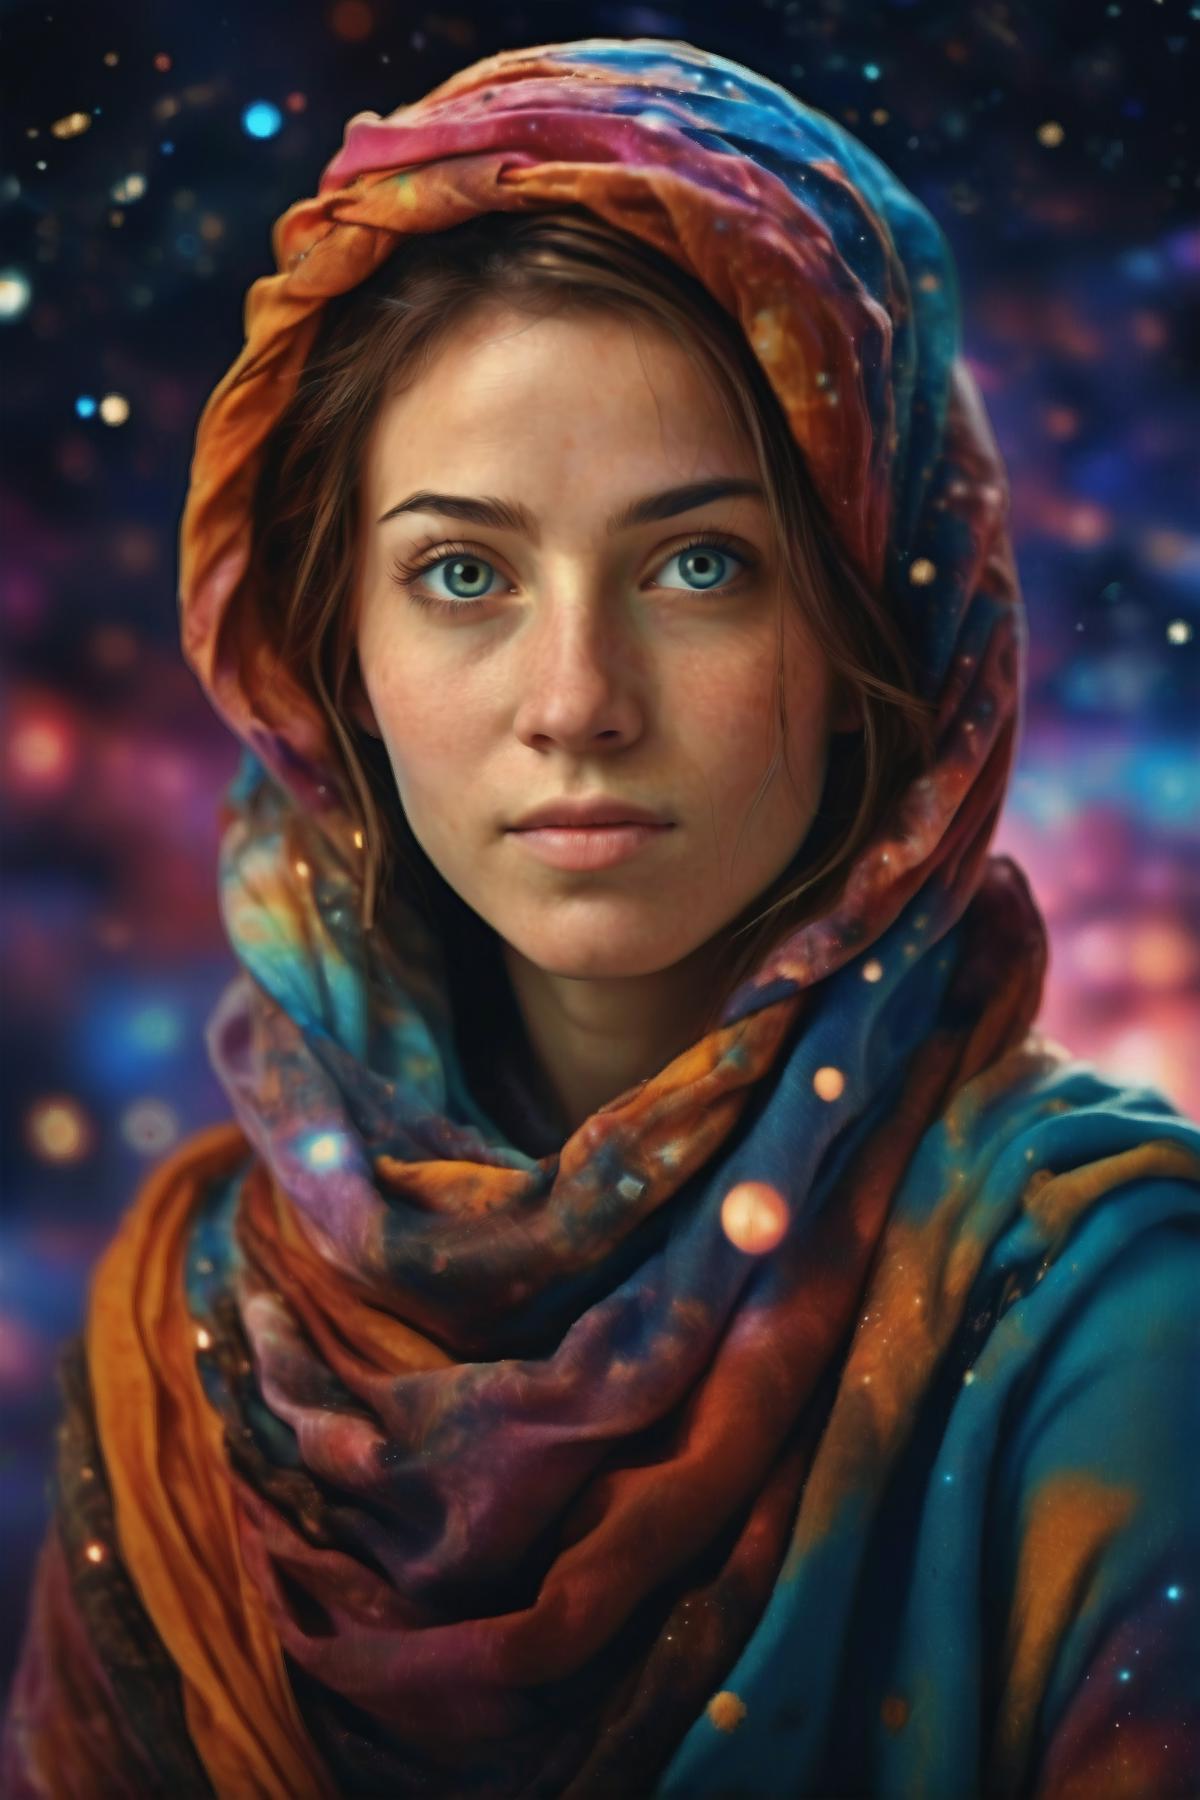 Portrait of an Afghan Girl - Headscarf Woman image by Catalorian